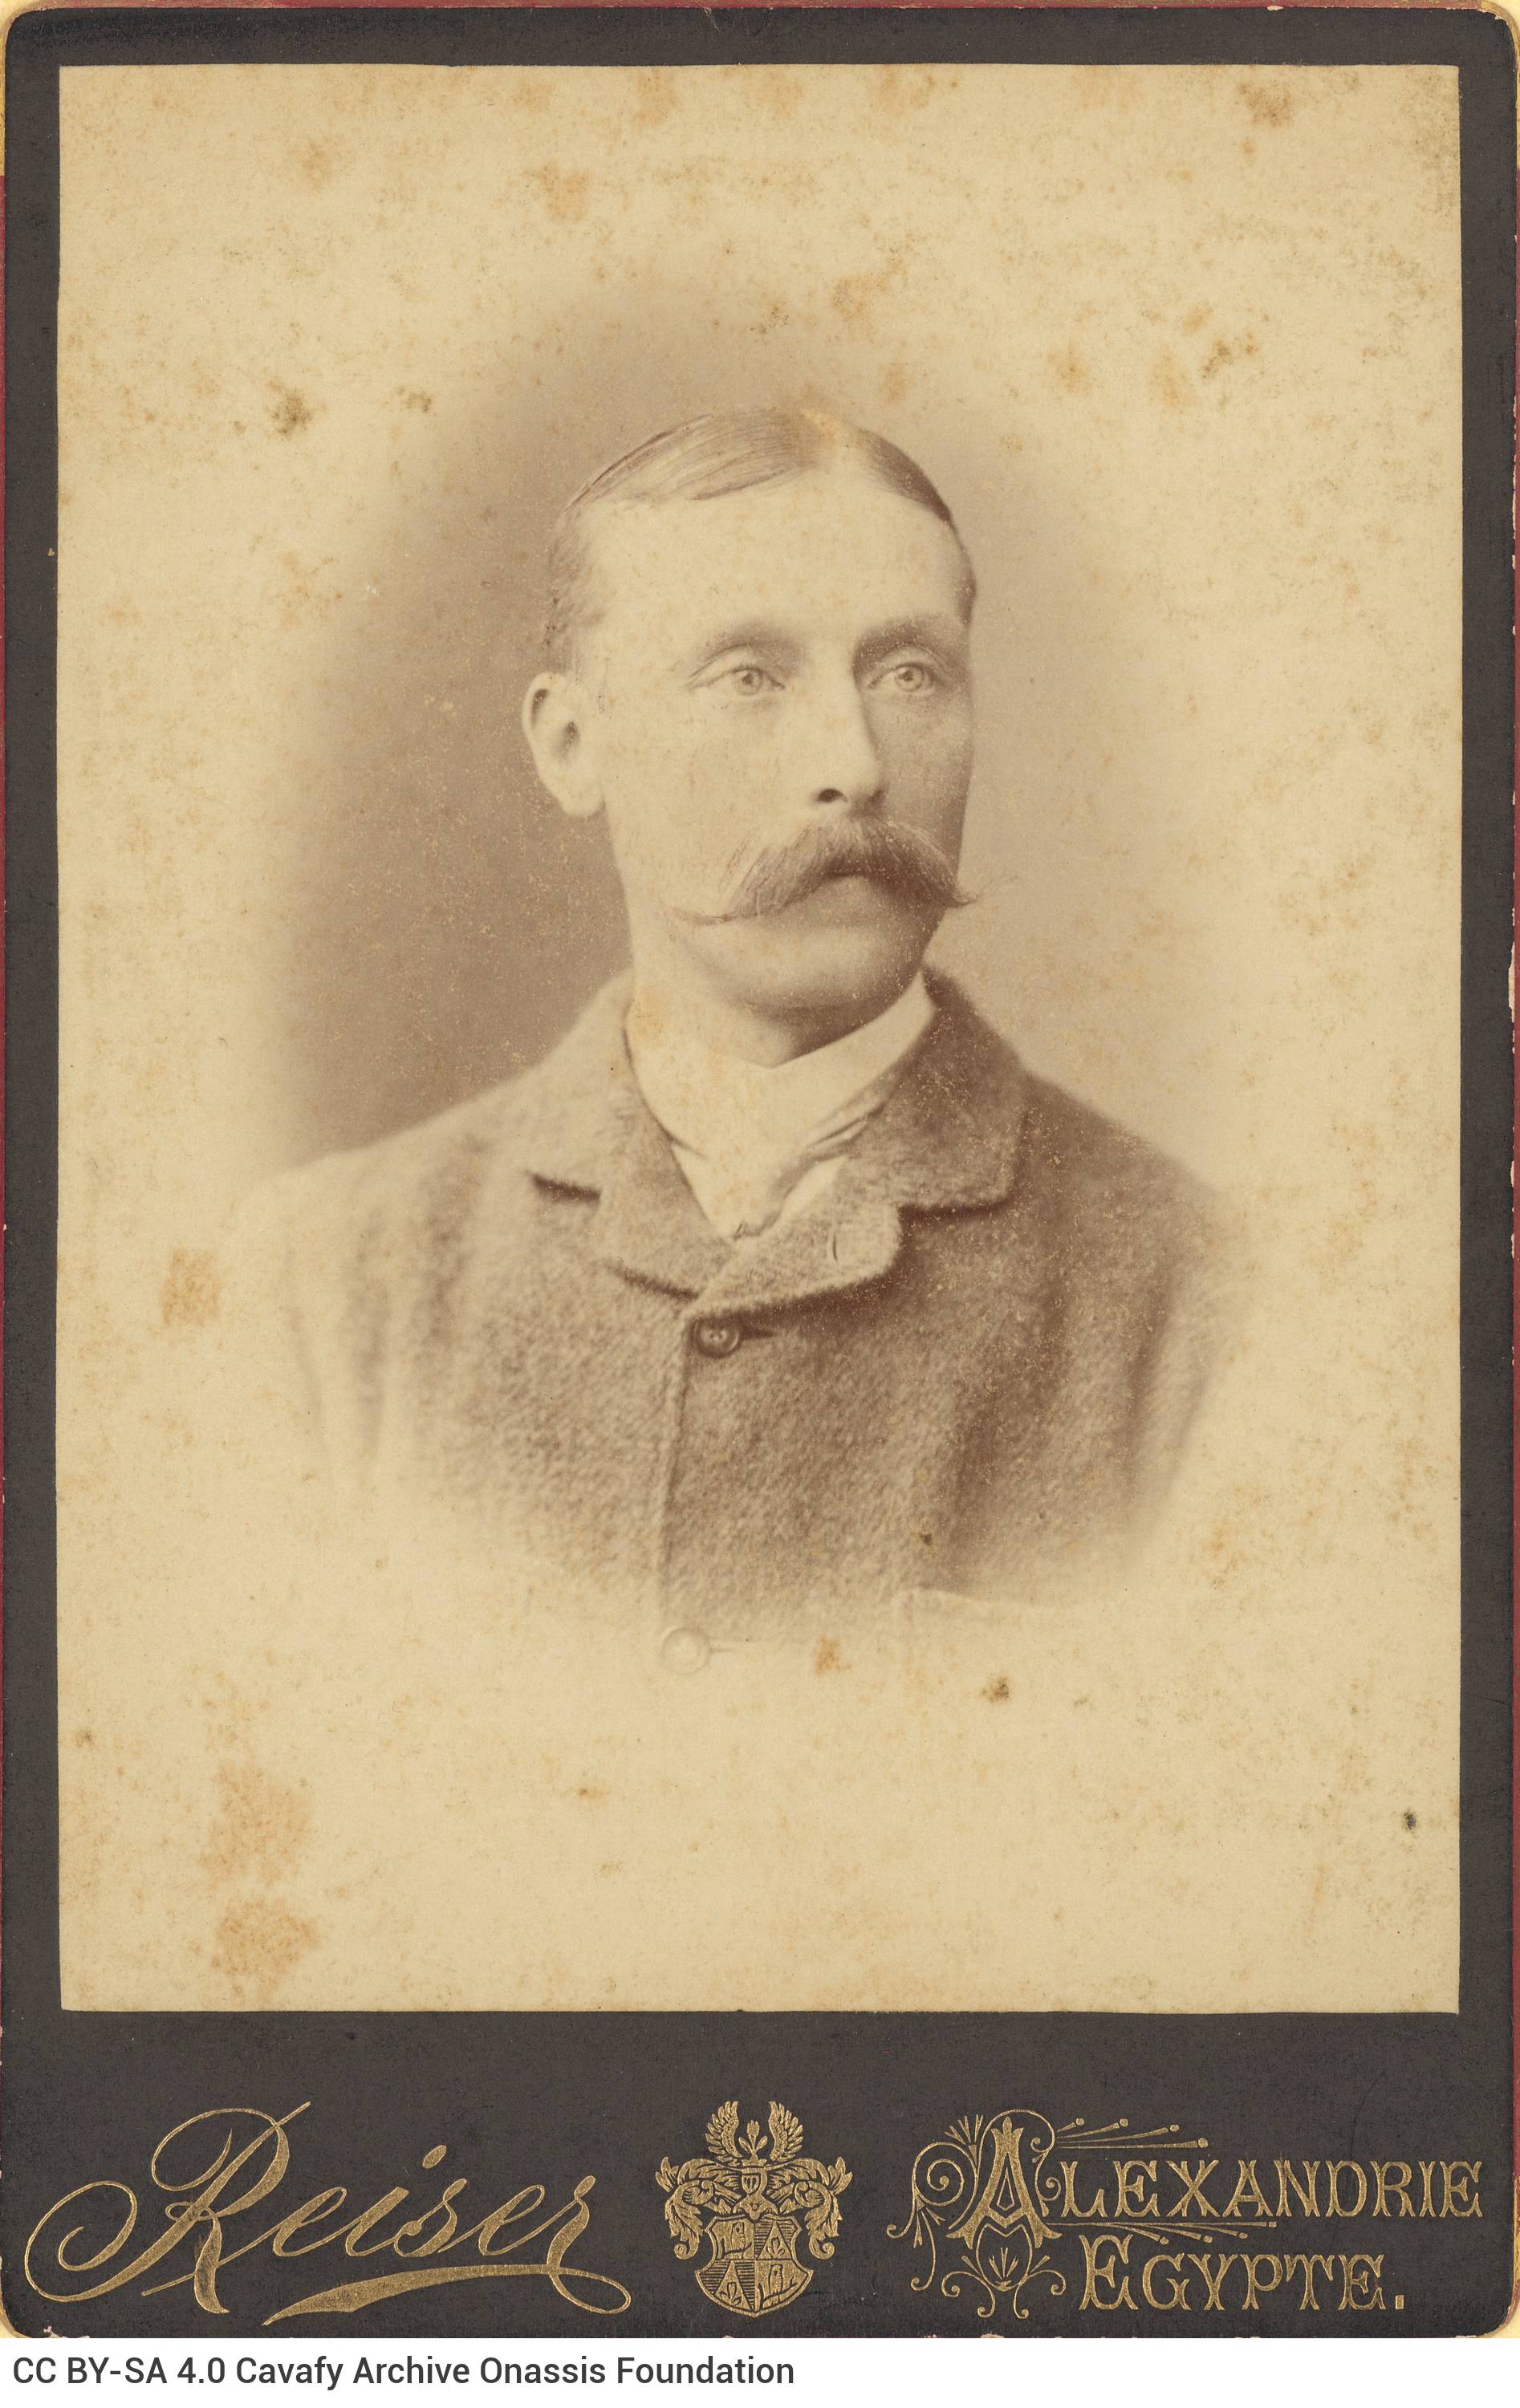 Undated photograph of an unknown man in a moustache The photographer's logo in the lower part of the frame.